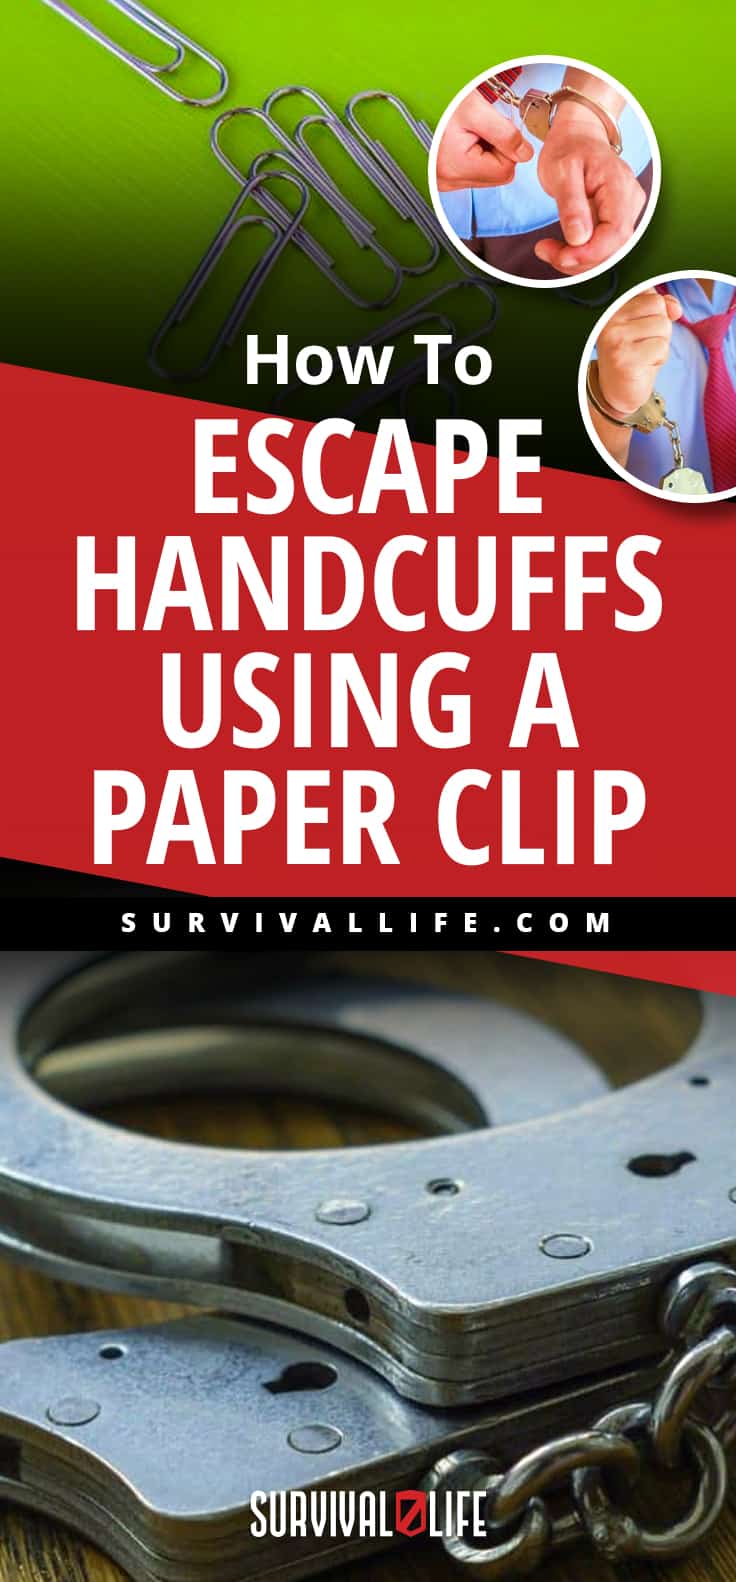 Placard | How To Escape Handcuffs Using A Paper Clip | how to pick handcuffs